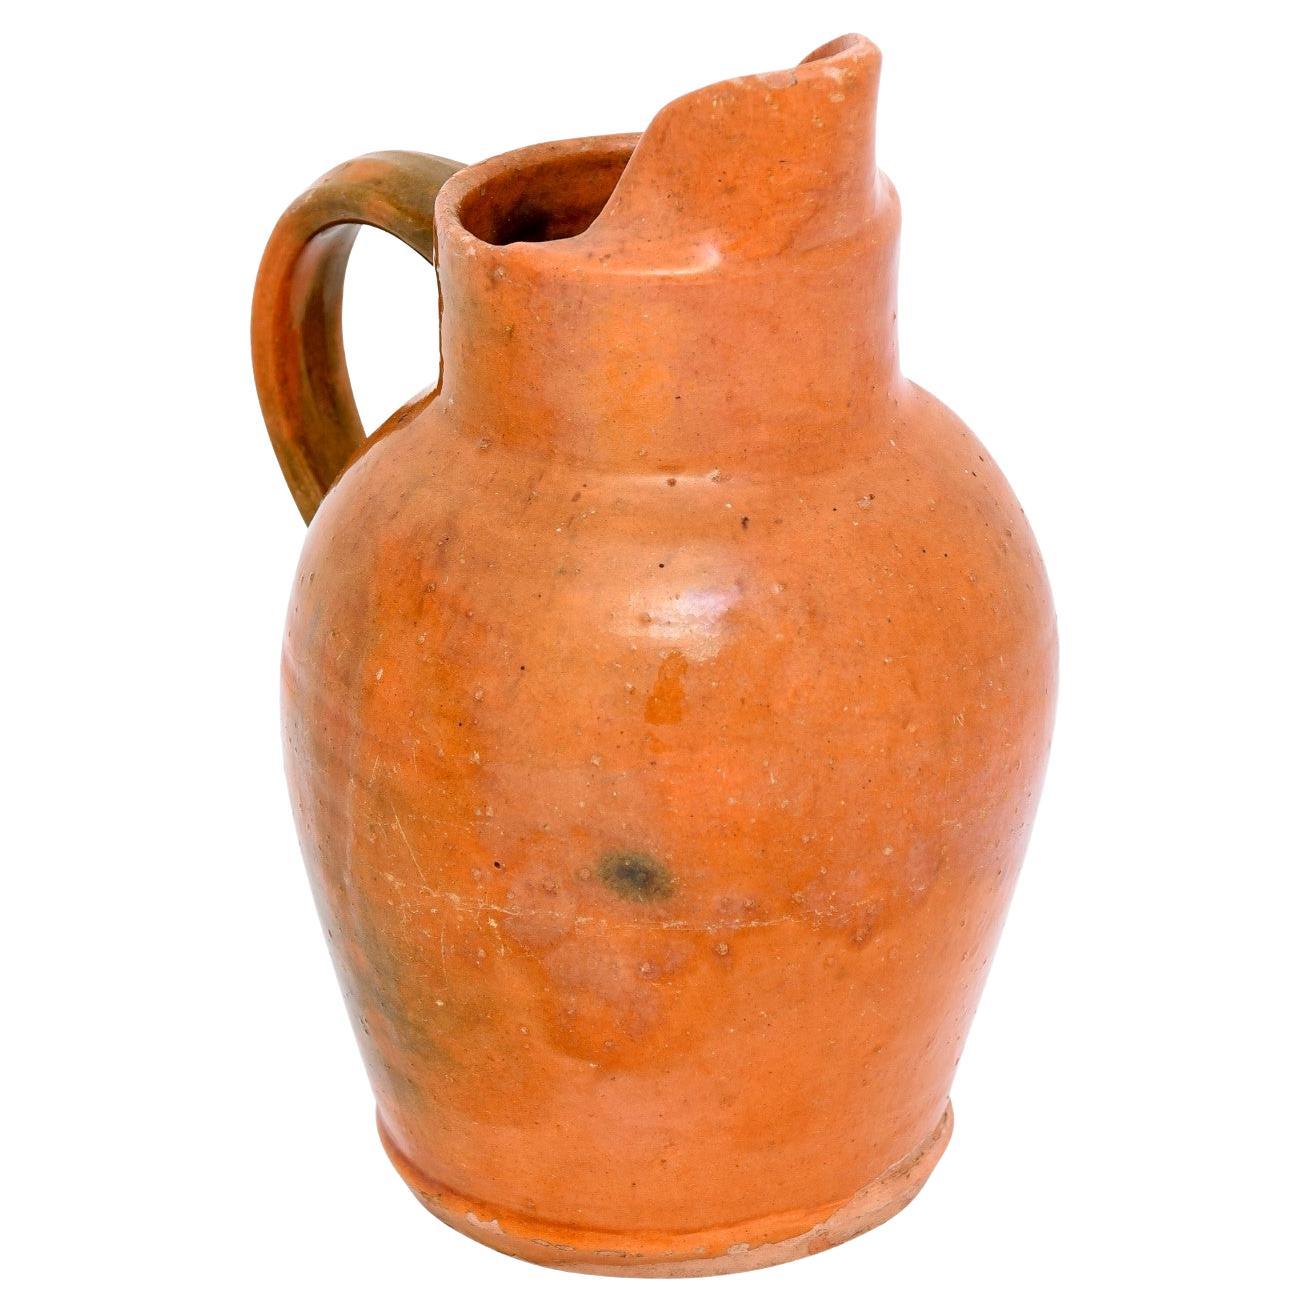 French 19th Century Pottery Jug with Orange Glaze, Back Handle and Front Spout